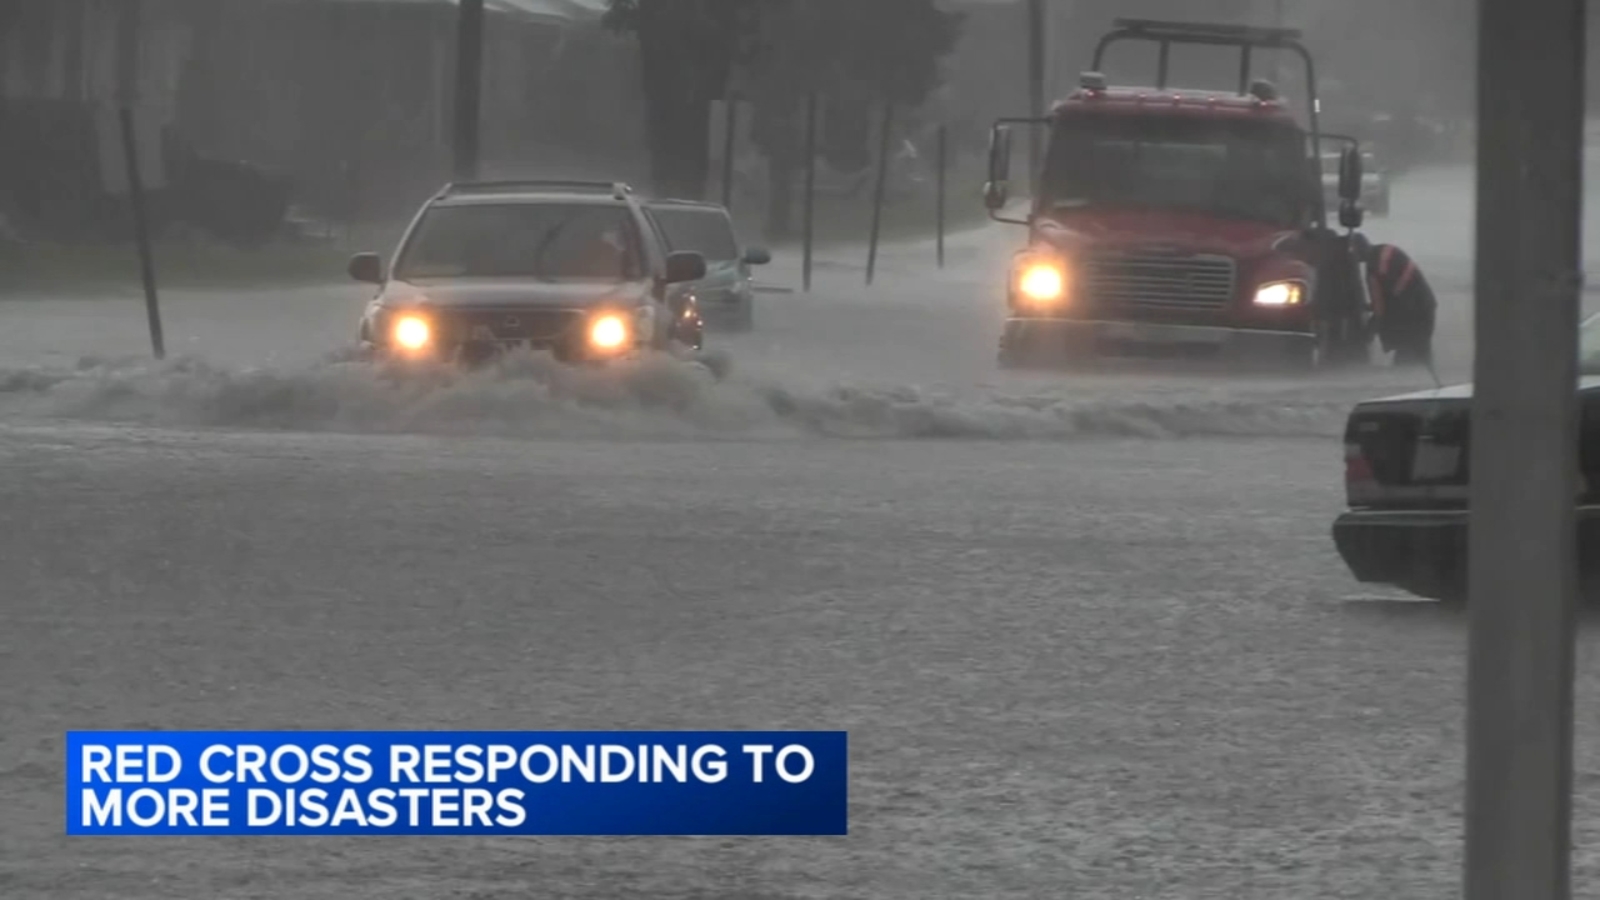 American Red Cross report shows major increase in severe weather disasters over past 10 years; trend expected to continue [Video]